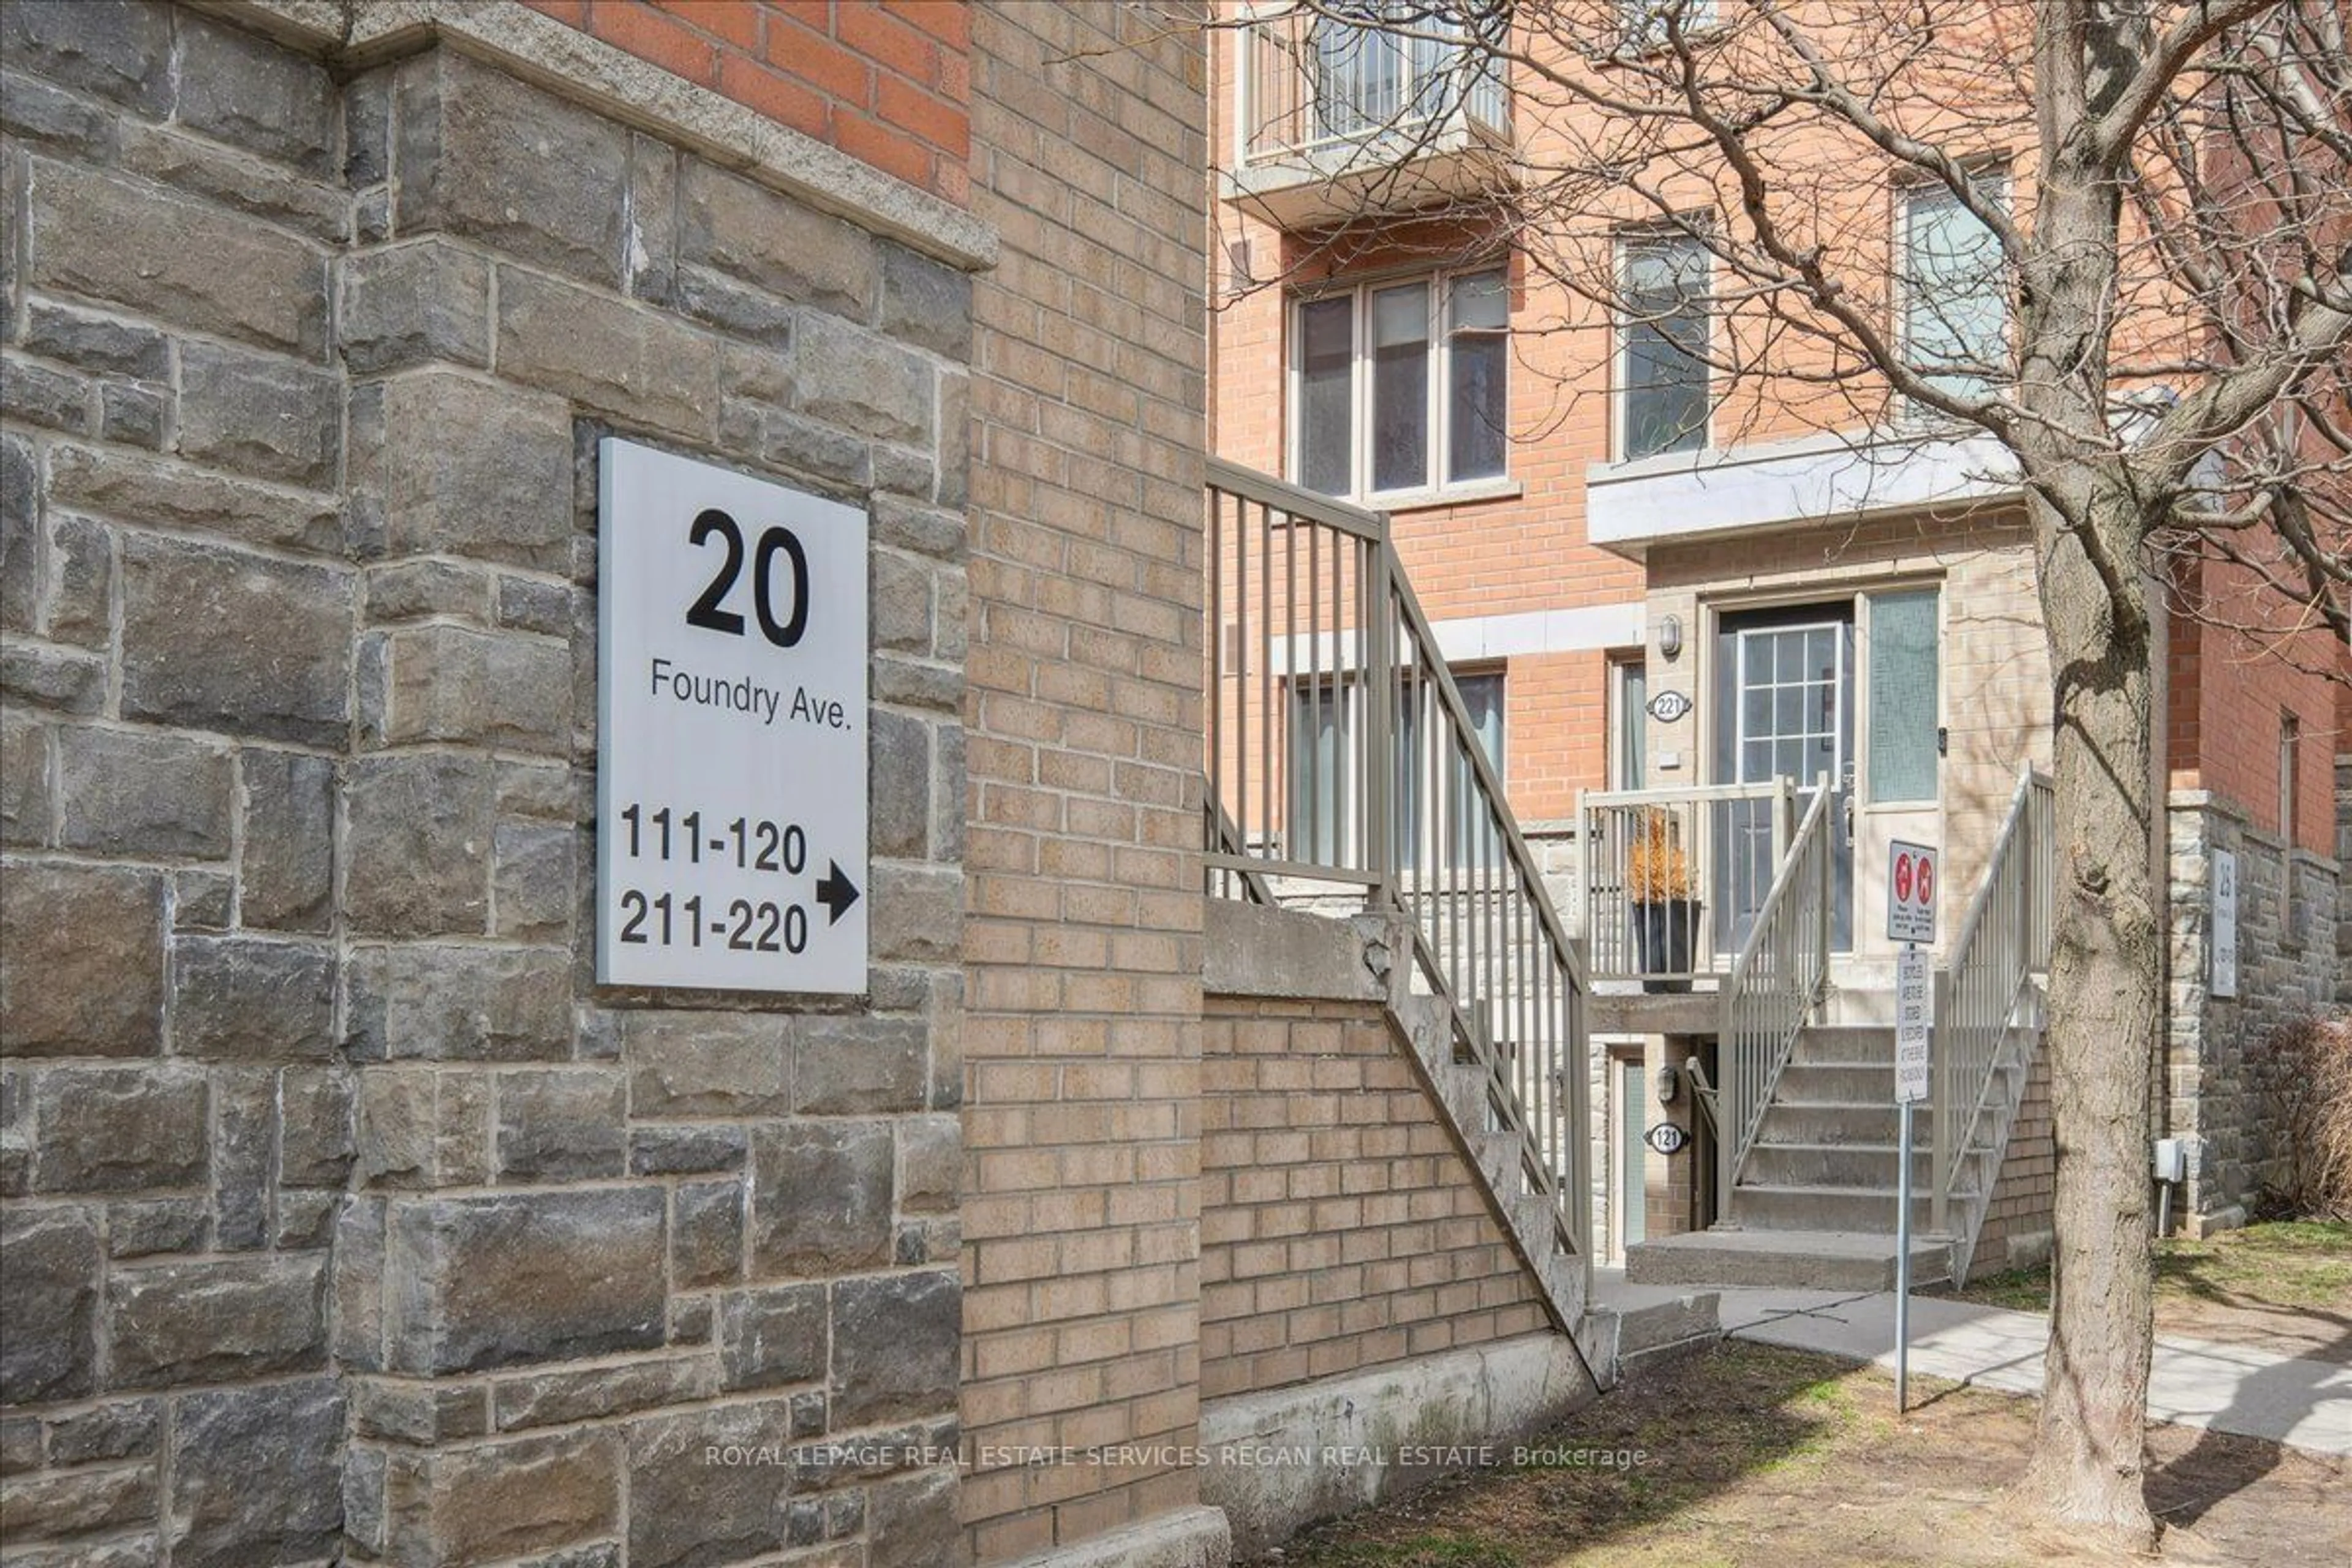 Street view for 20 Foundry Ave #111, Toronto Ontario M6H 4L1